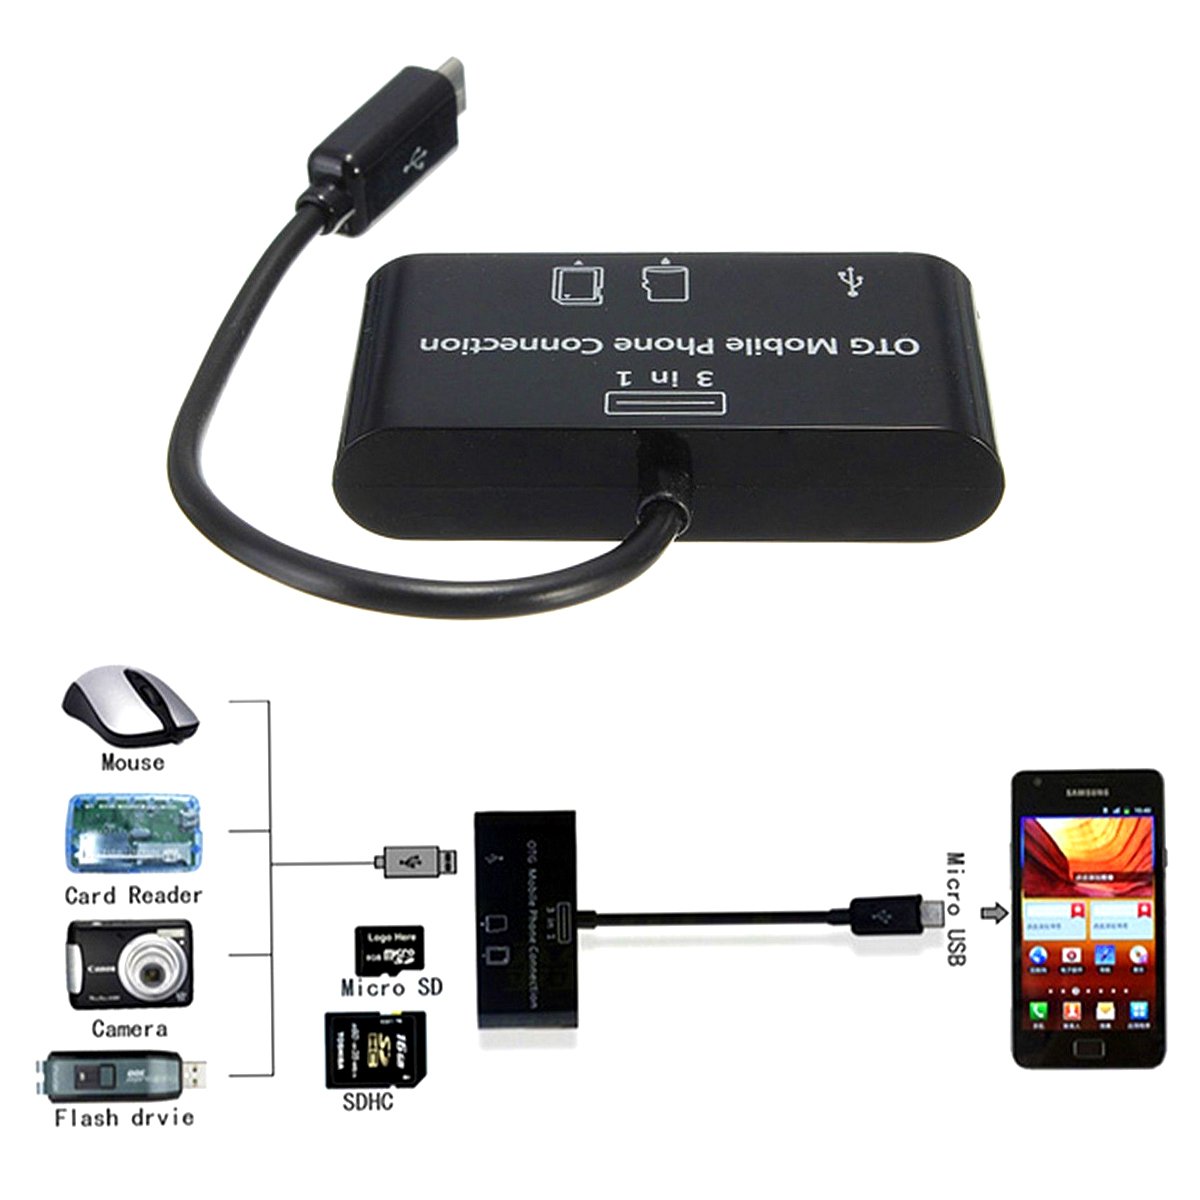 Type-C - USB / SD Card Reader Card Hub Adapter Supports SD, MMC, Micro SD, and More''''